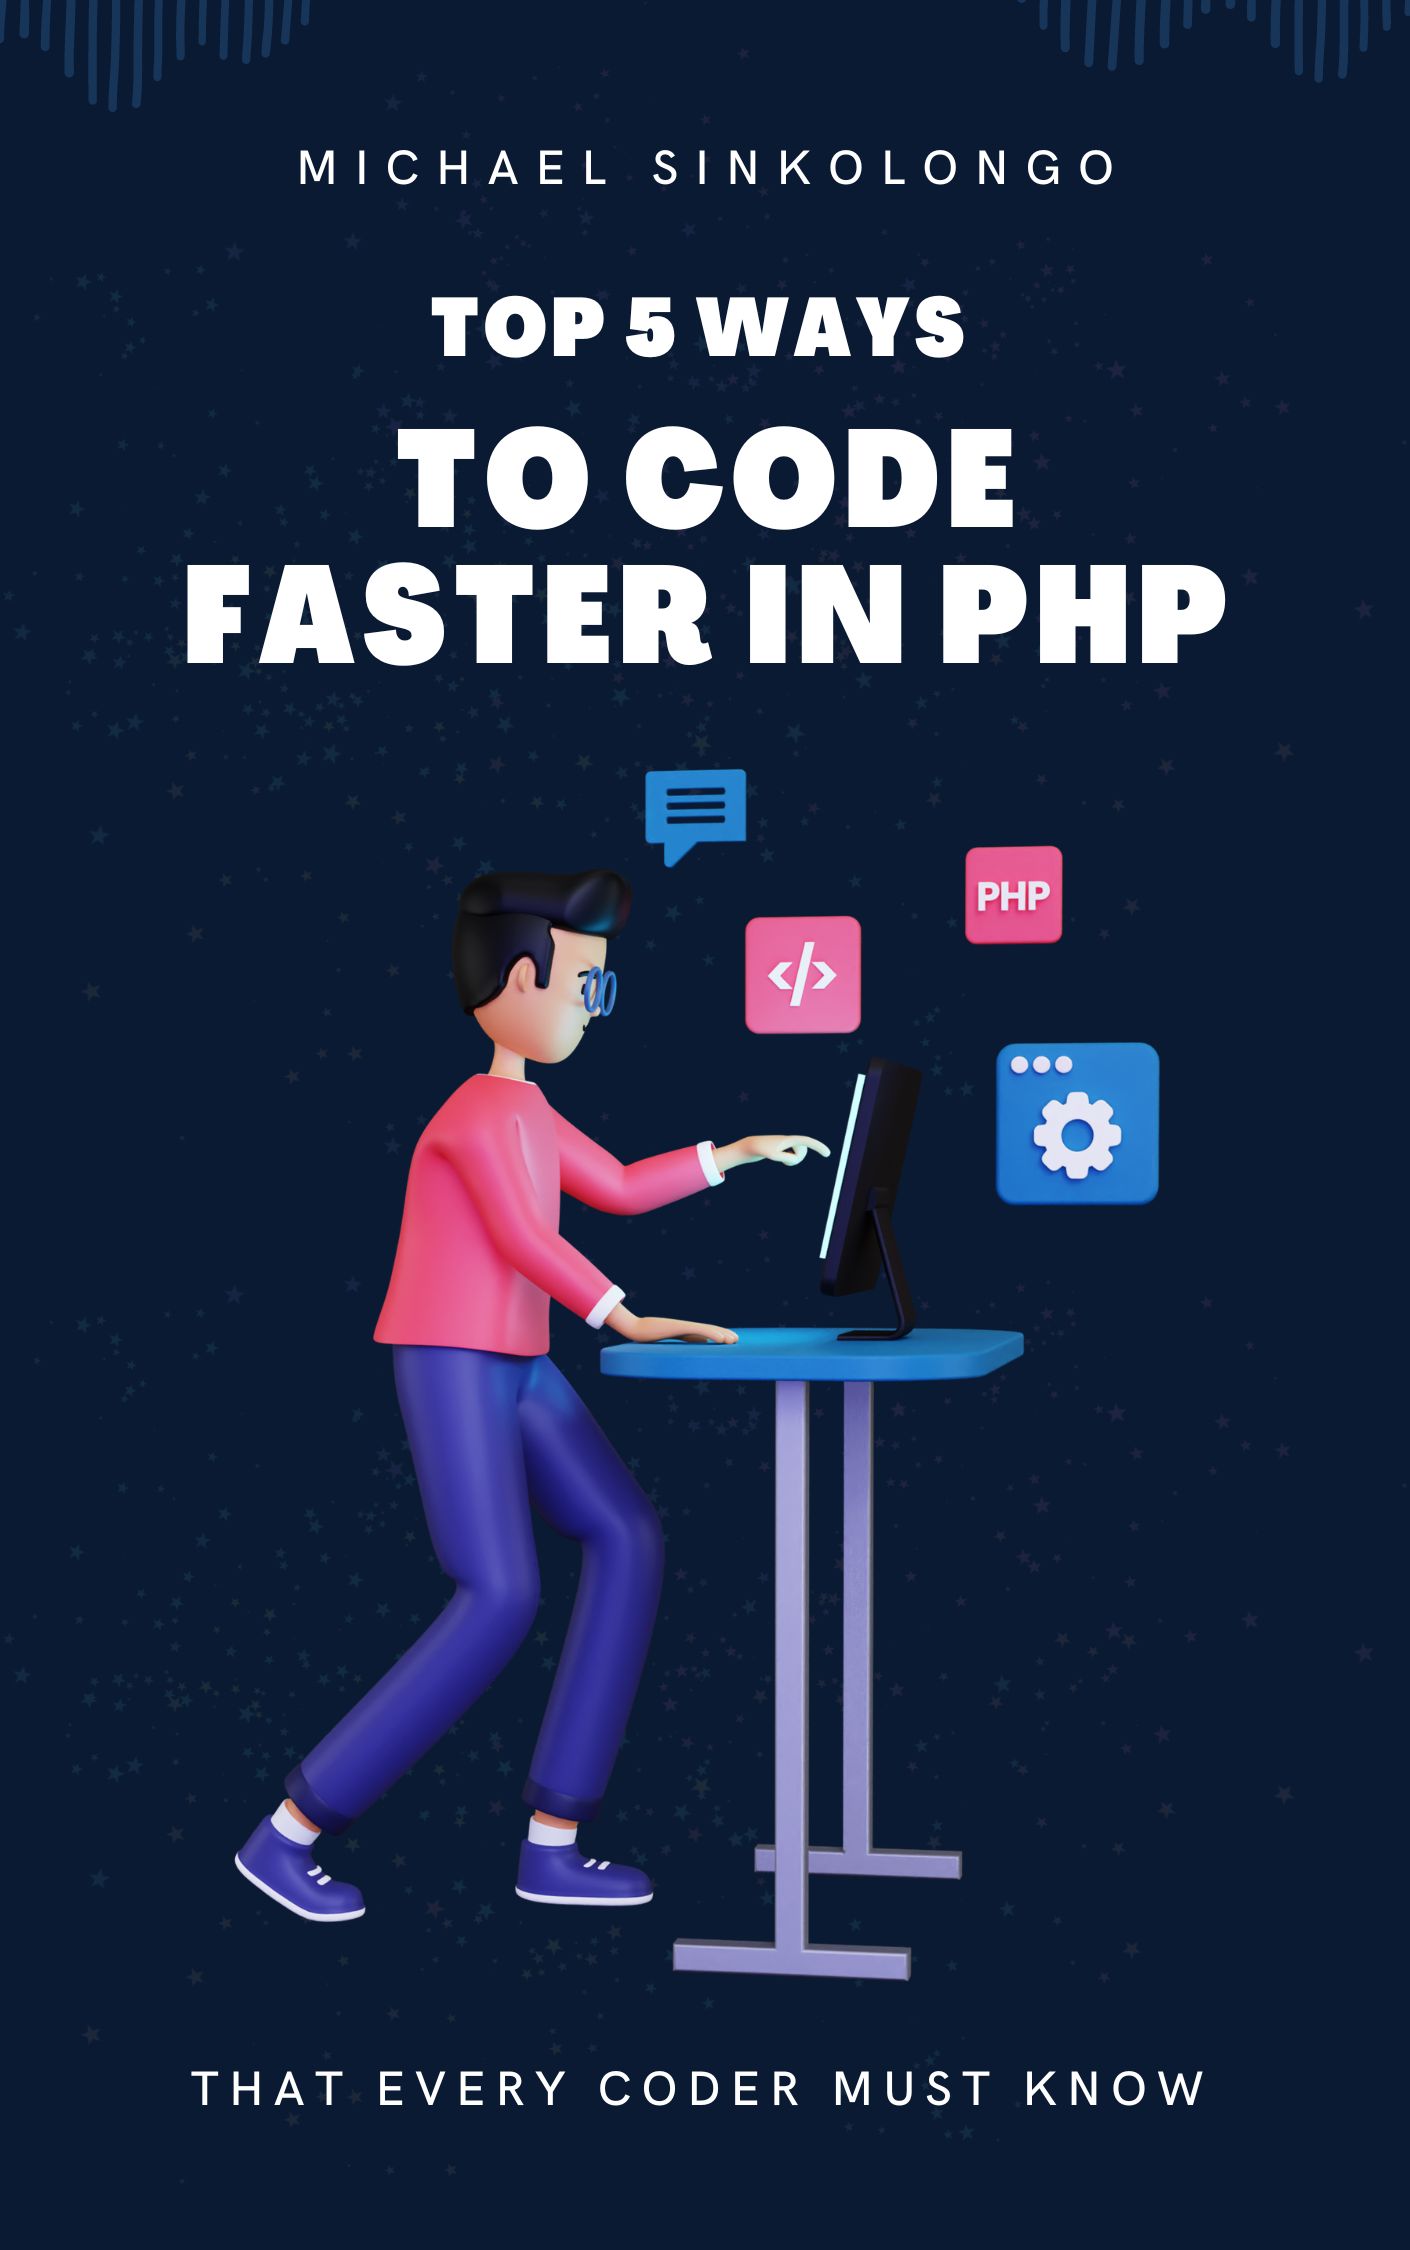 Top 5 Ways to Code Faster in PHP Every Coder Must Know